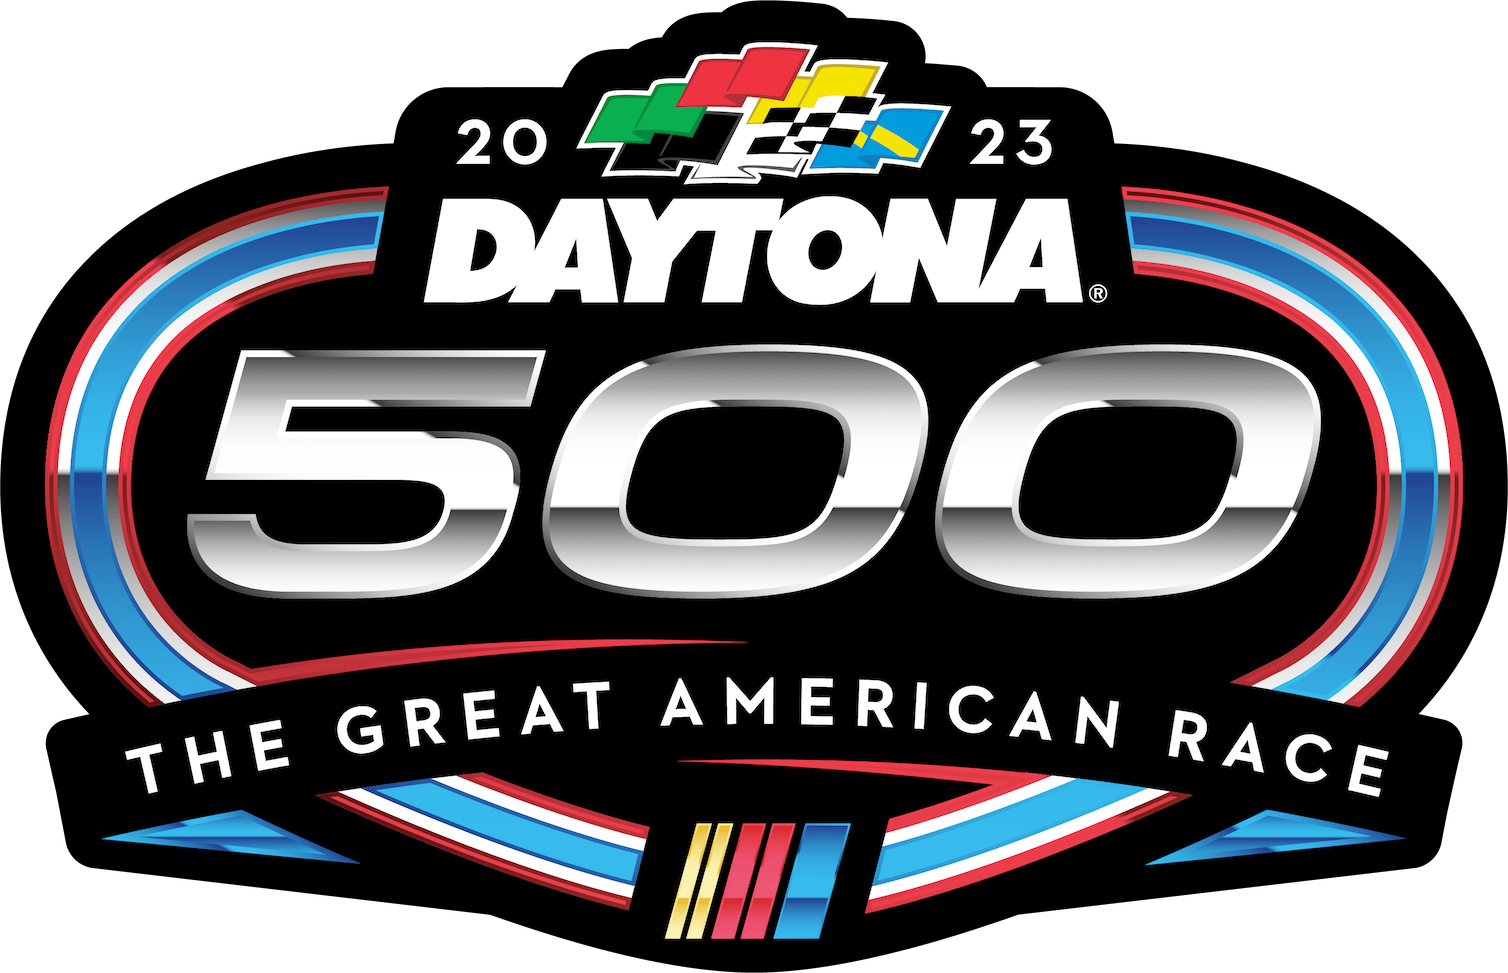 Daytona 500 live stream 2023 how to watch NASCAR online from anywhere